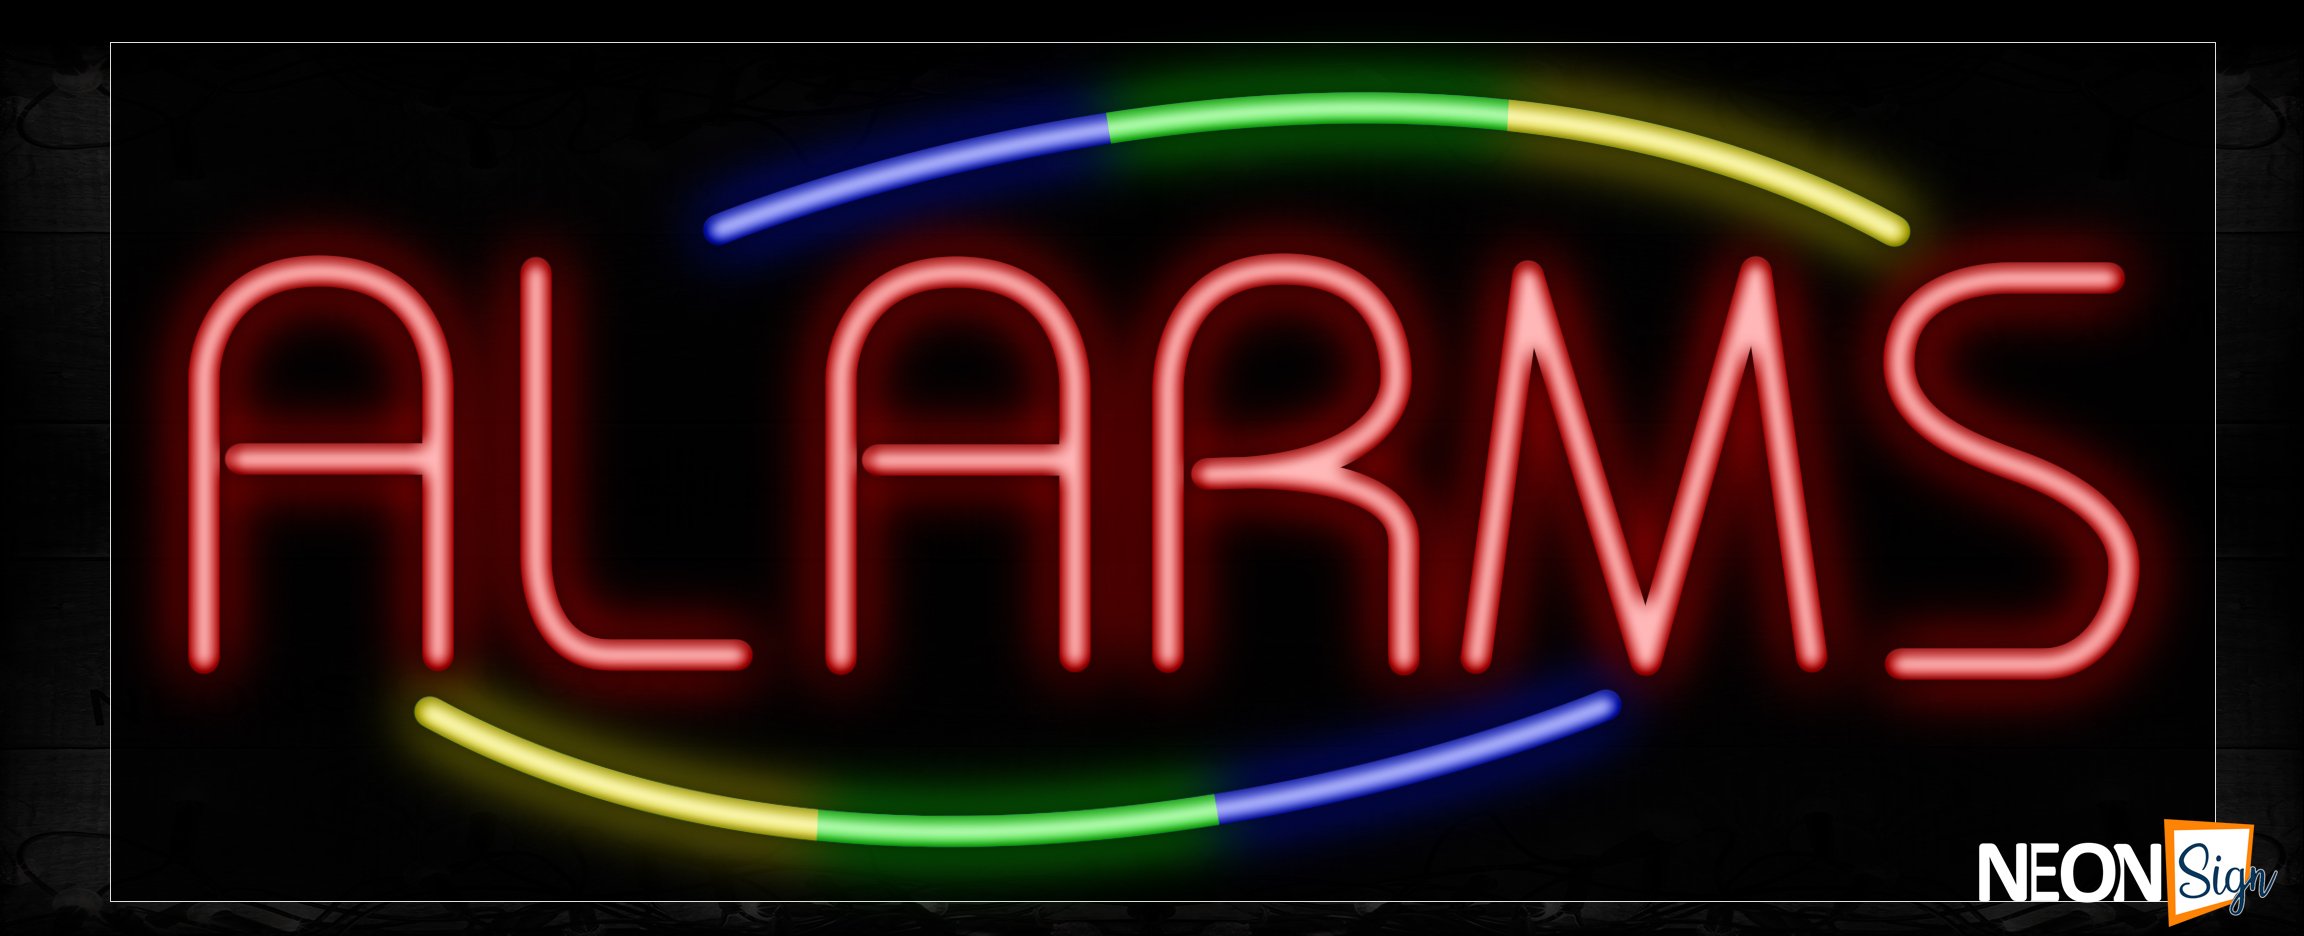 Image of 10725 Alarms in red with colorful arc border Neon Sign_13x32 Black Backing